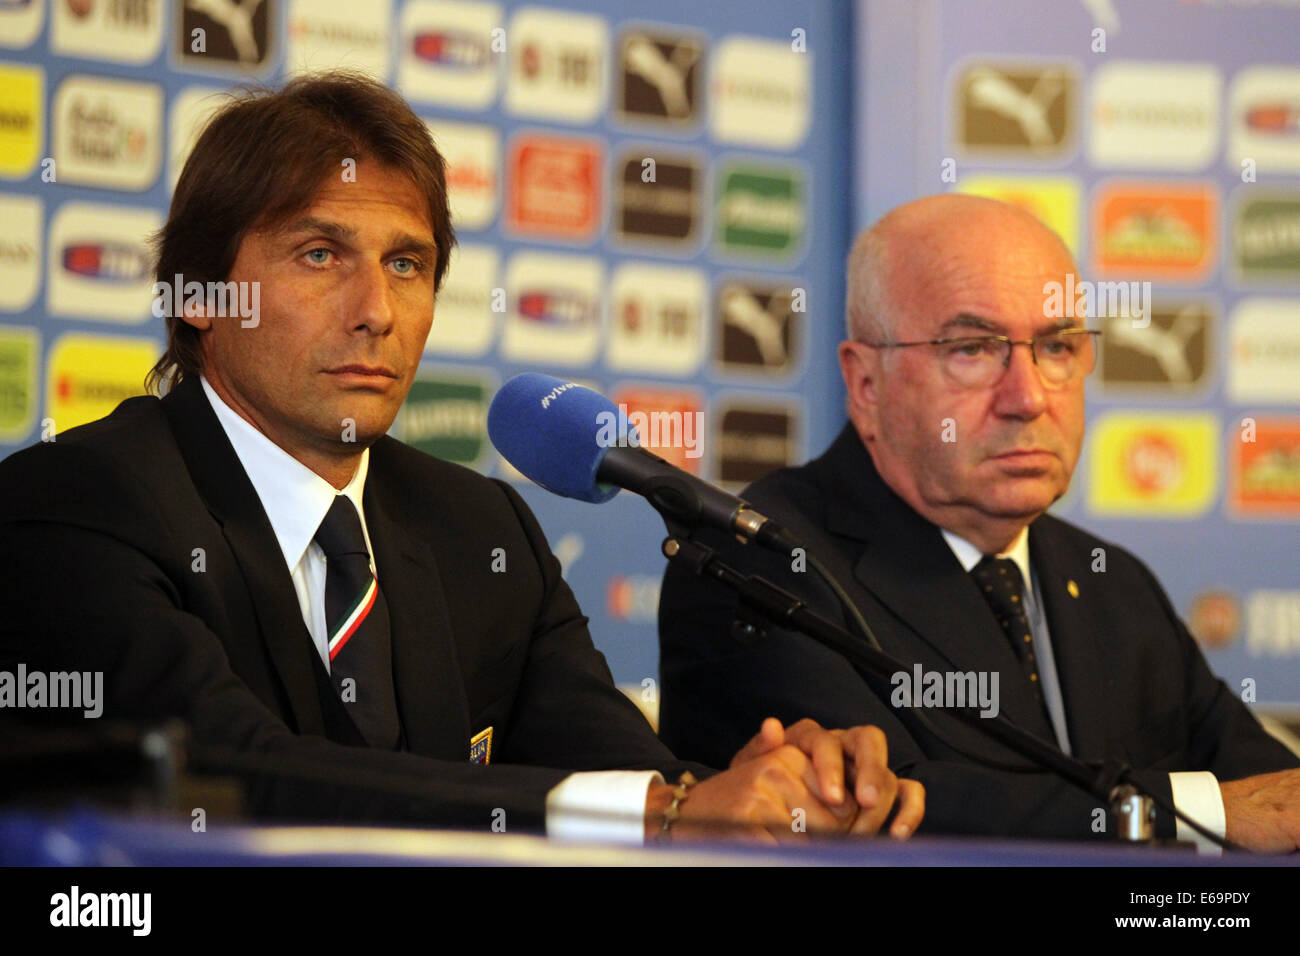 Rome, Italy. 19th August, 2014.  hotel parco dei principi Football / Soccer:  Antonio Conte is the new coach of the italian national soccer team, replaces Cesare Prandelli after the disastrous adventure to the world cup in brazil 2014, his salary is 4 milion euro years     (photo: Marco Iacobucci/Alamy live news) Stock Photo